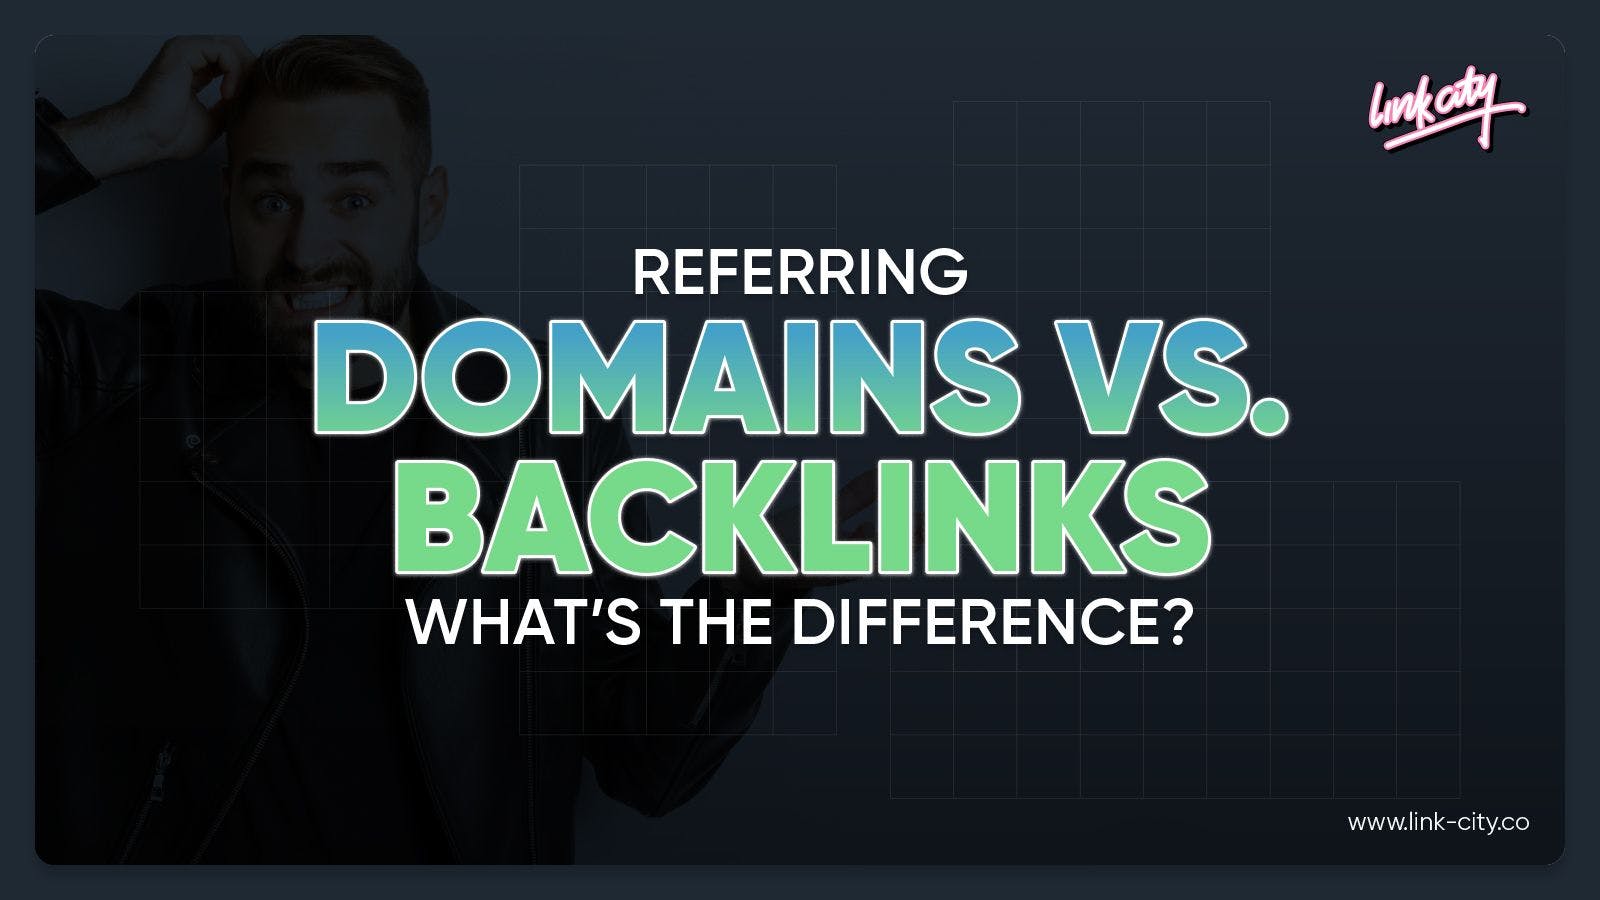 Referring Domains vs. Backlinks: What's the Difference?